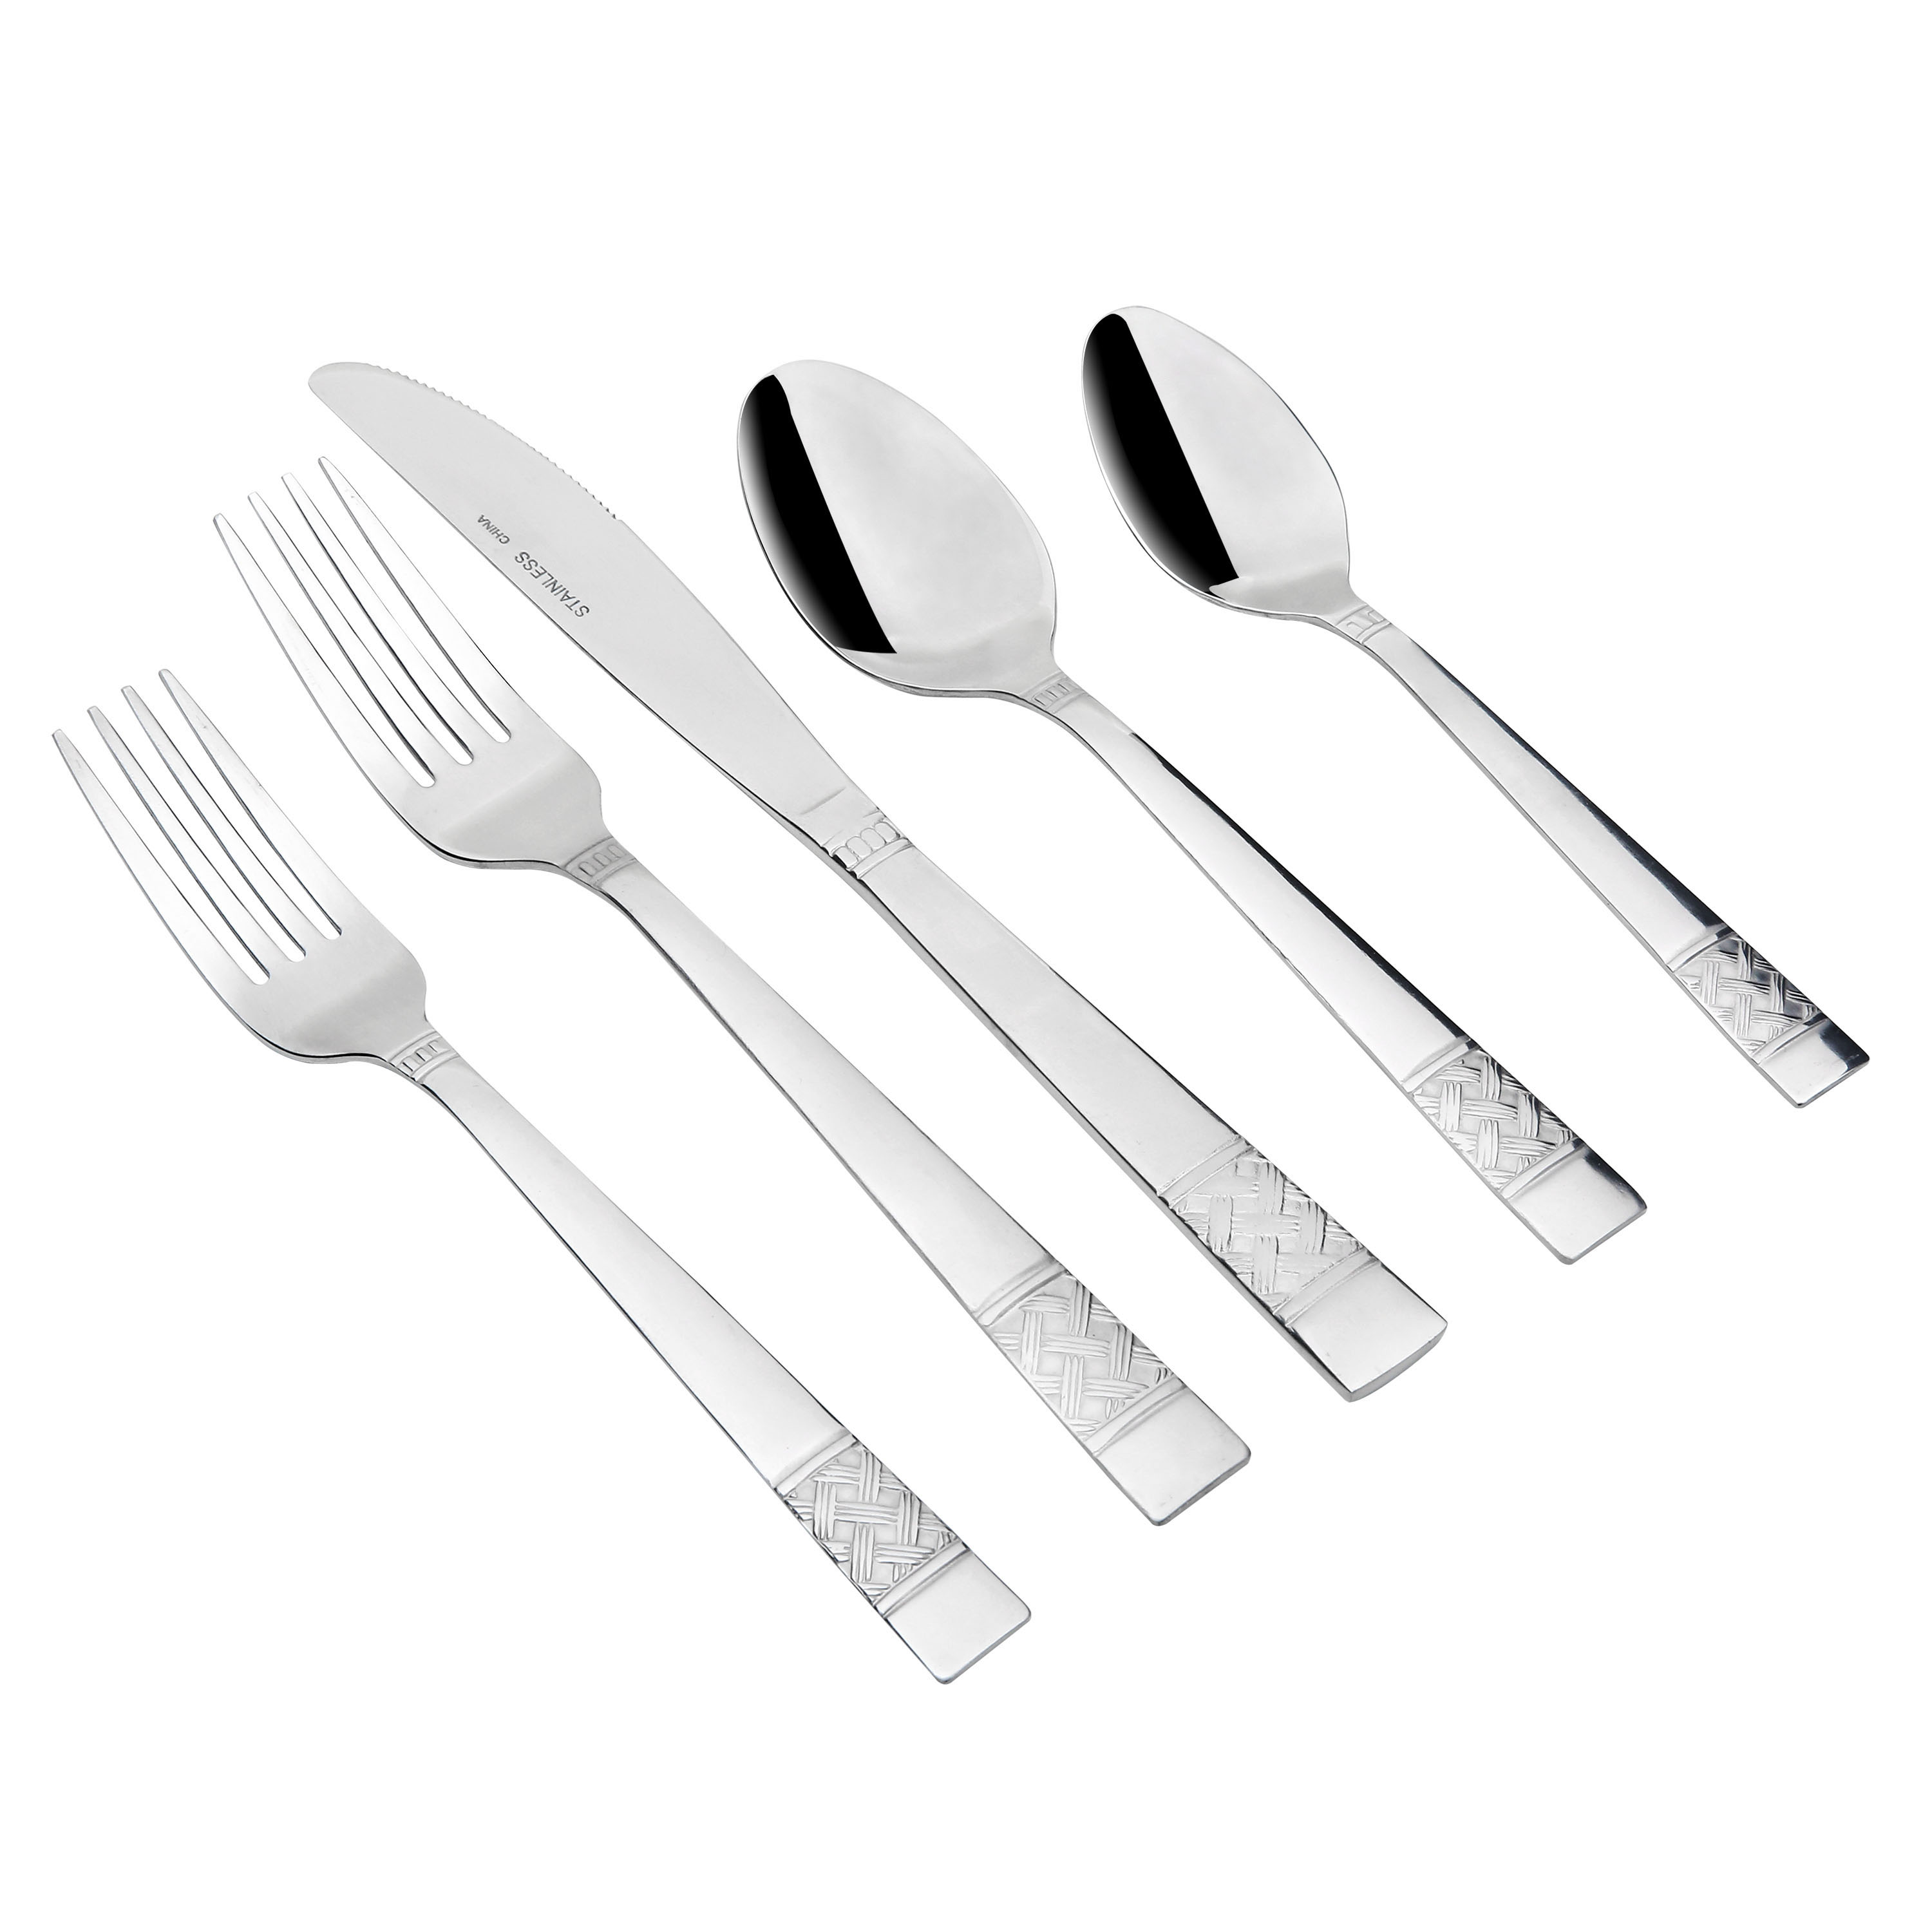 Mainstays Pierremont 20-Piece Stainless Steel Flatware Set, Silver, Service for 4 - image 5 of 11